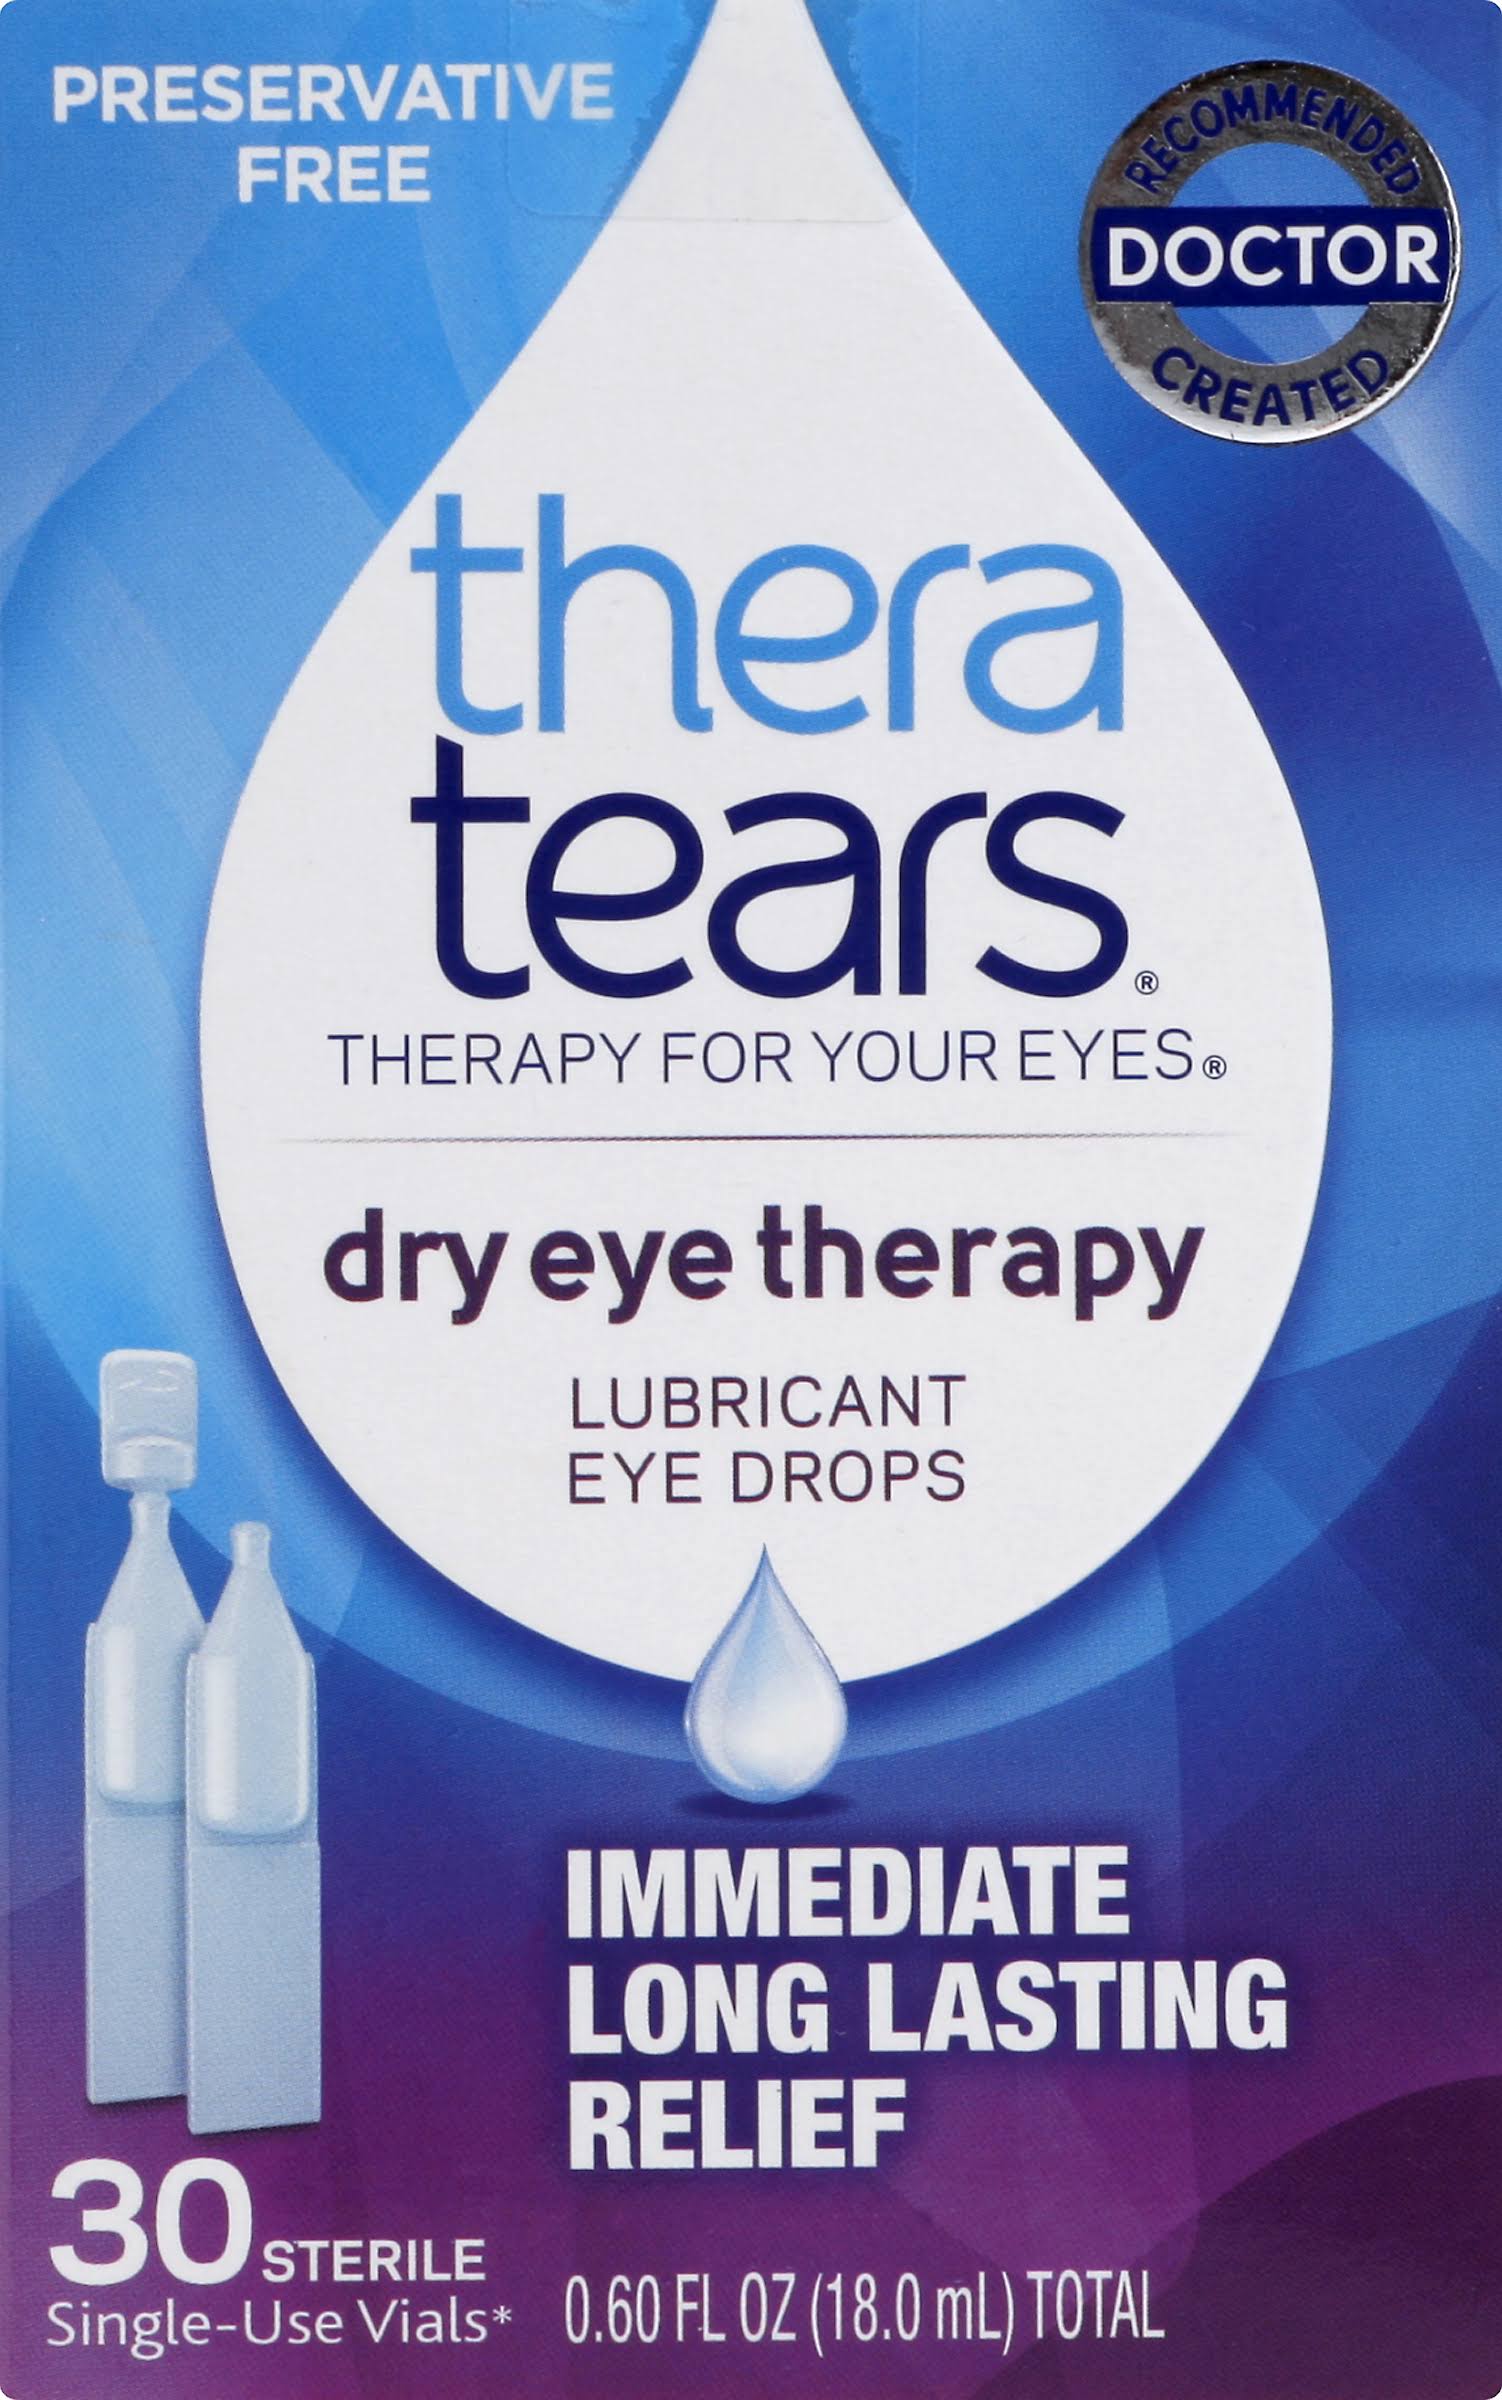 TheraTears Dry Eye Therapy Lubricant Eye Drops 30 Sterile Single-use Vials